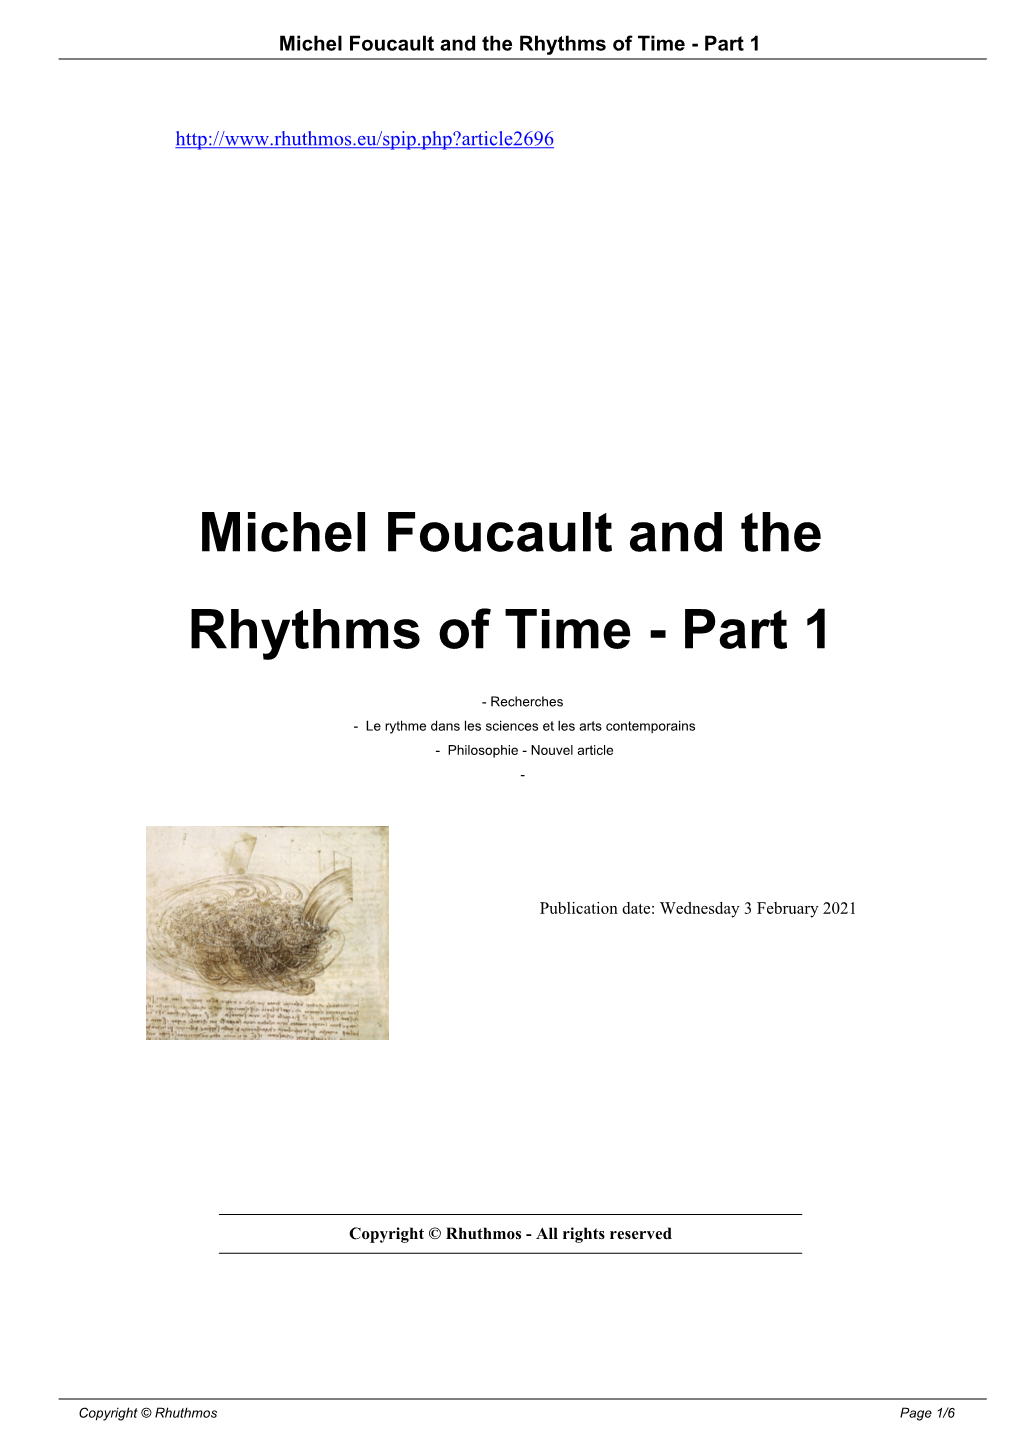 Michel Foucault and the Rhythms of Time - Part 1